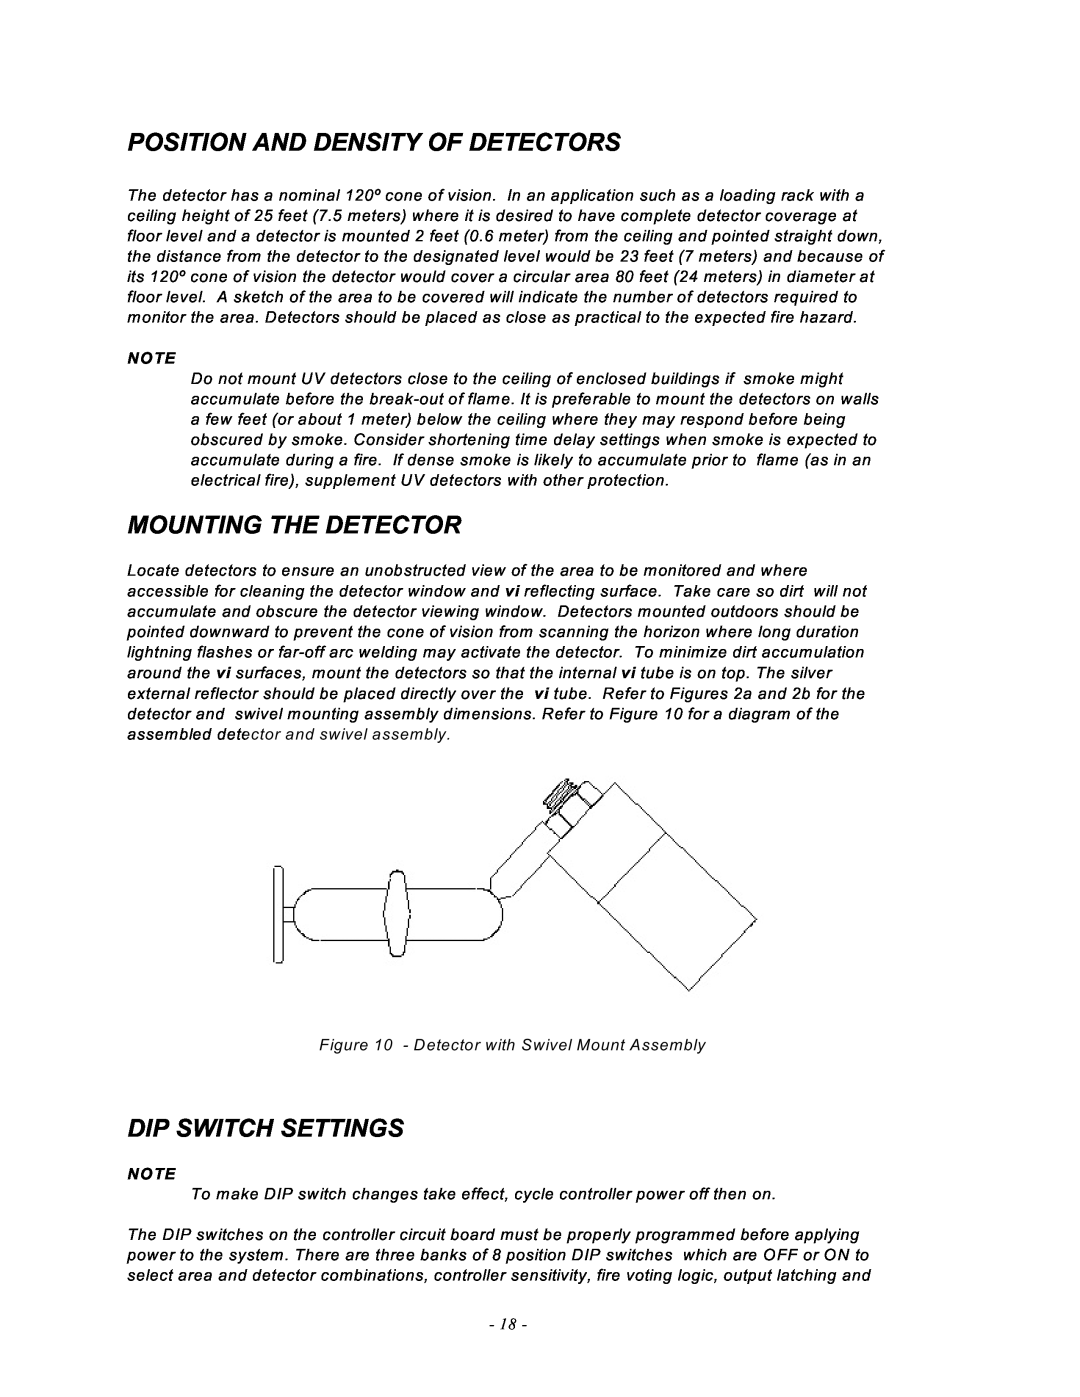 Emerson MAN -0016-00, UVC120 manual Position And Density Of Detectors, Mounting The Detector, Dip Switch Settings 